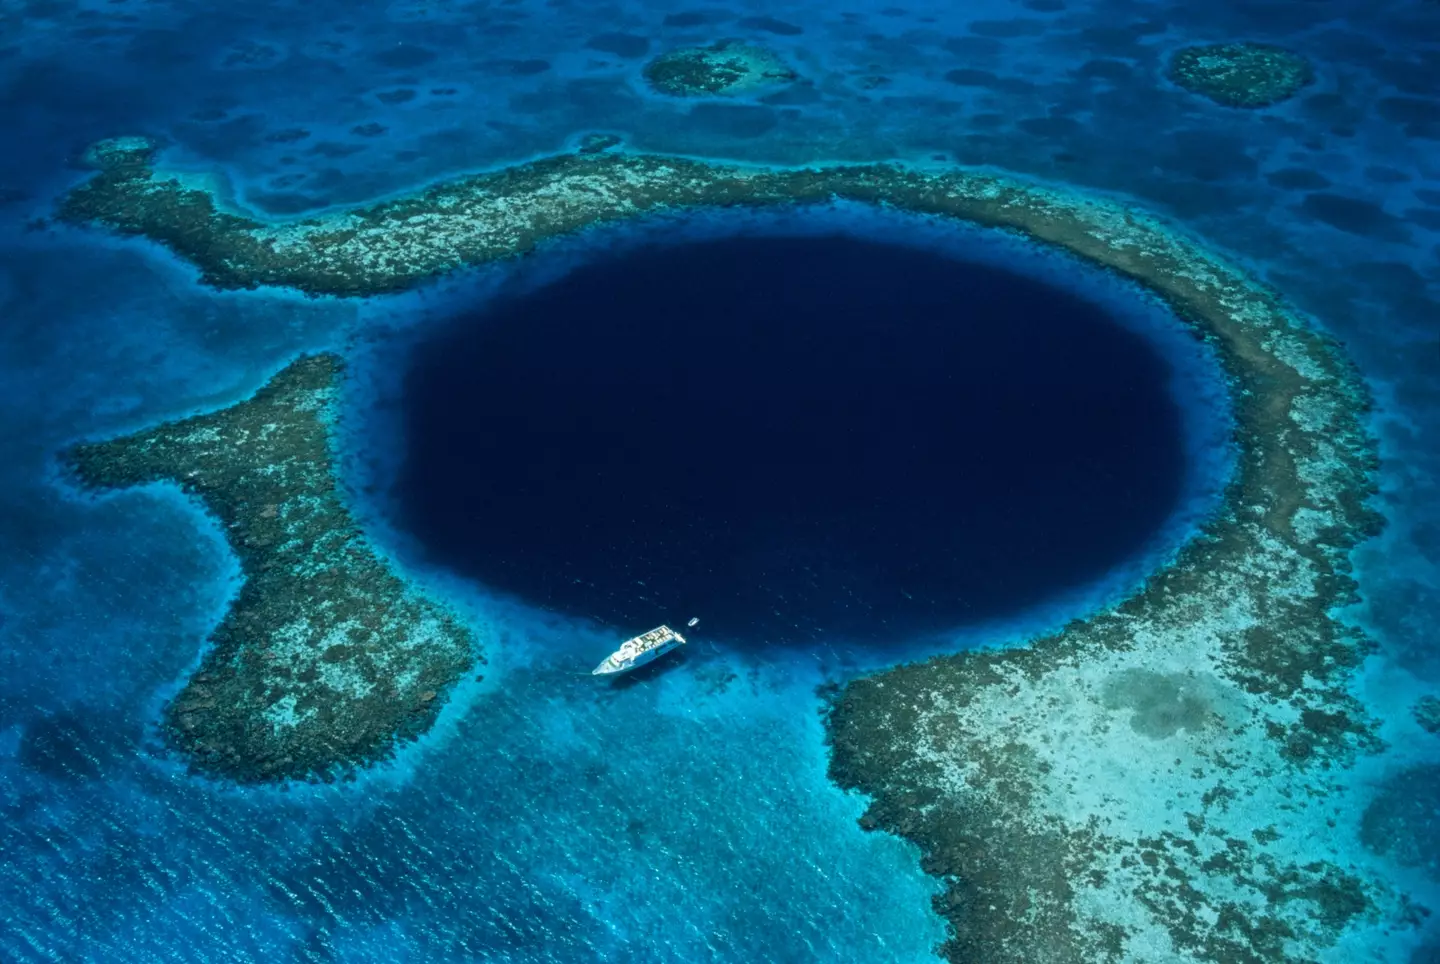 The Great Blue Hole is located off the coast of Belize.